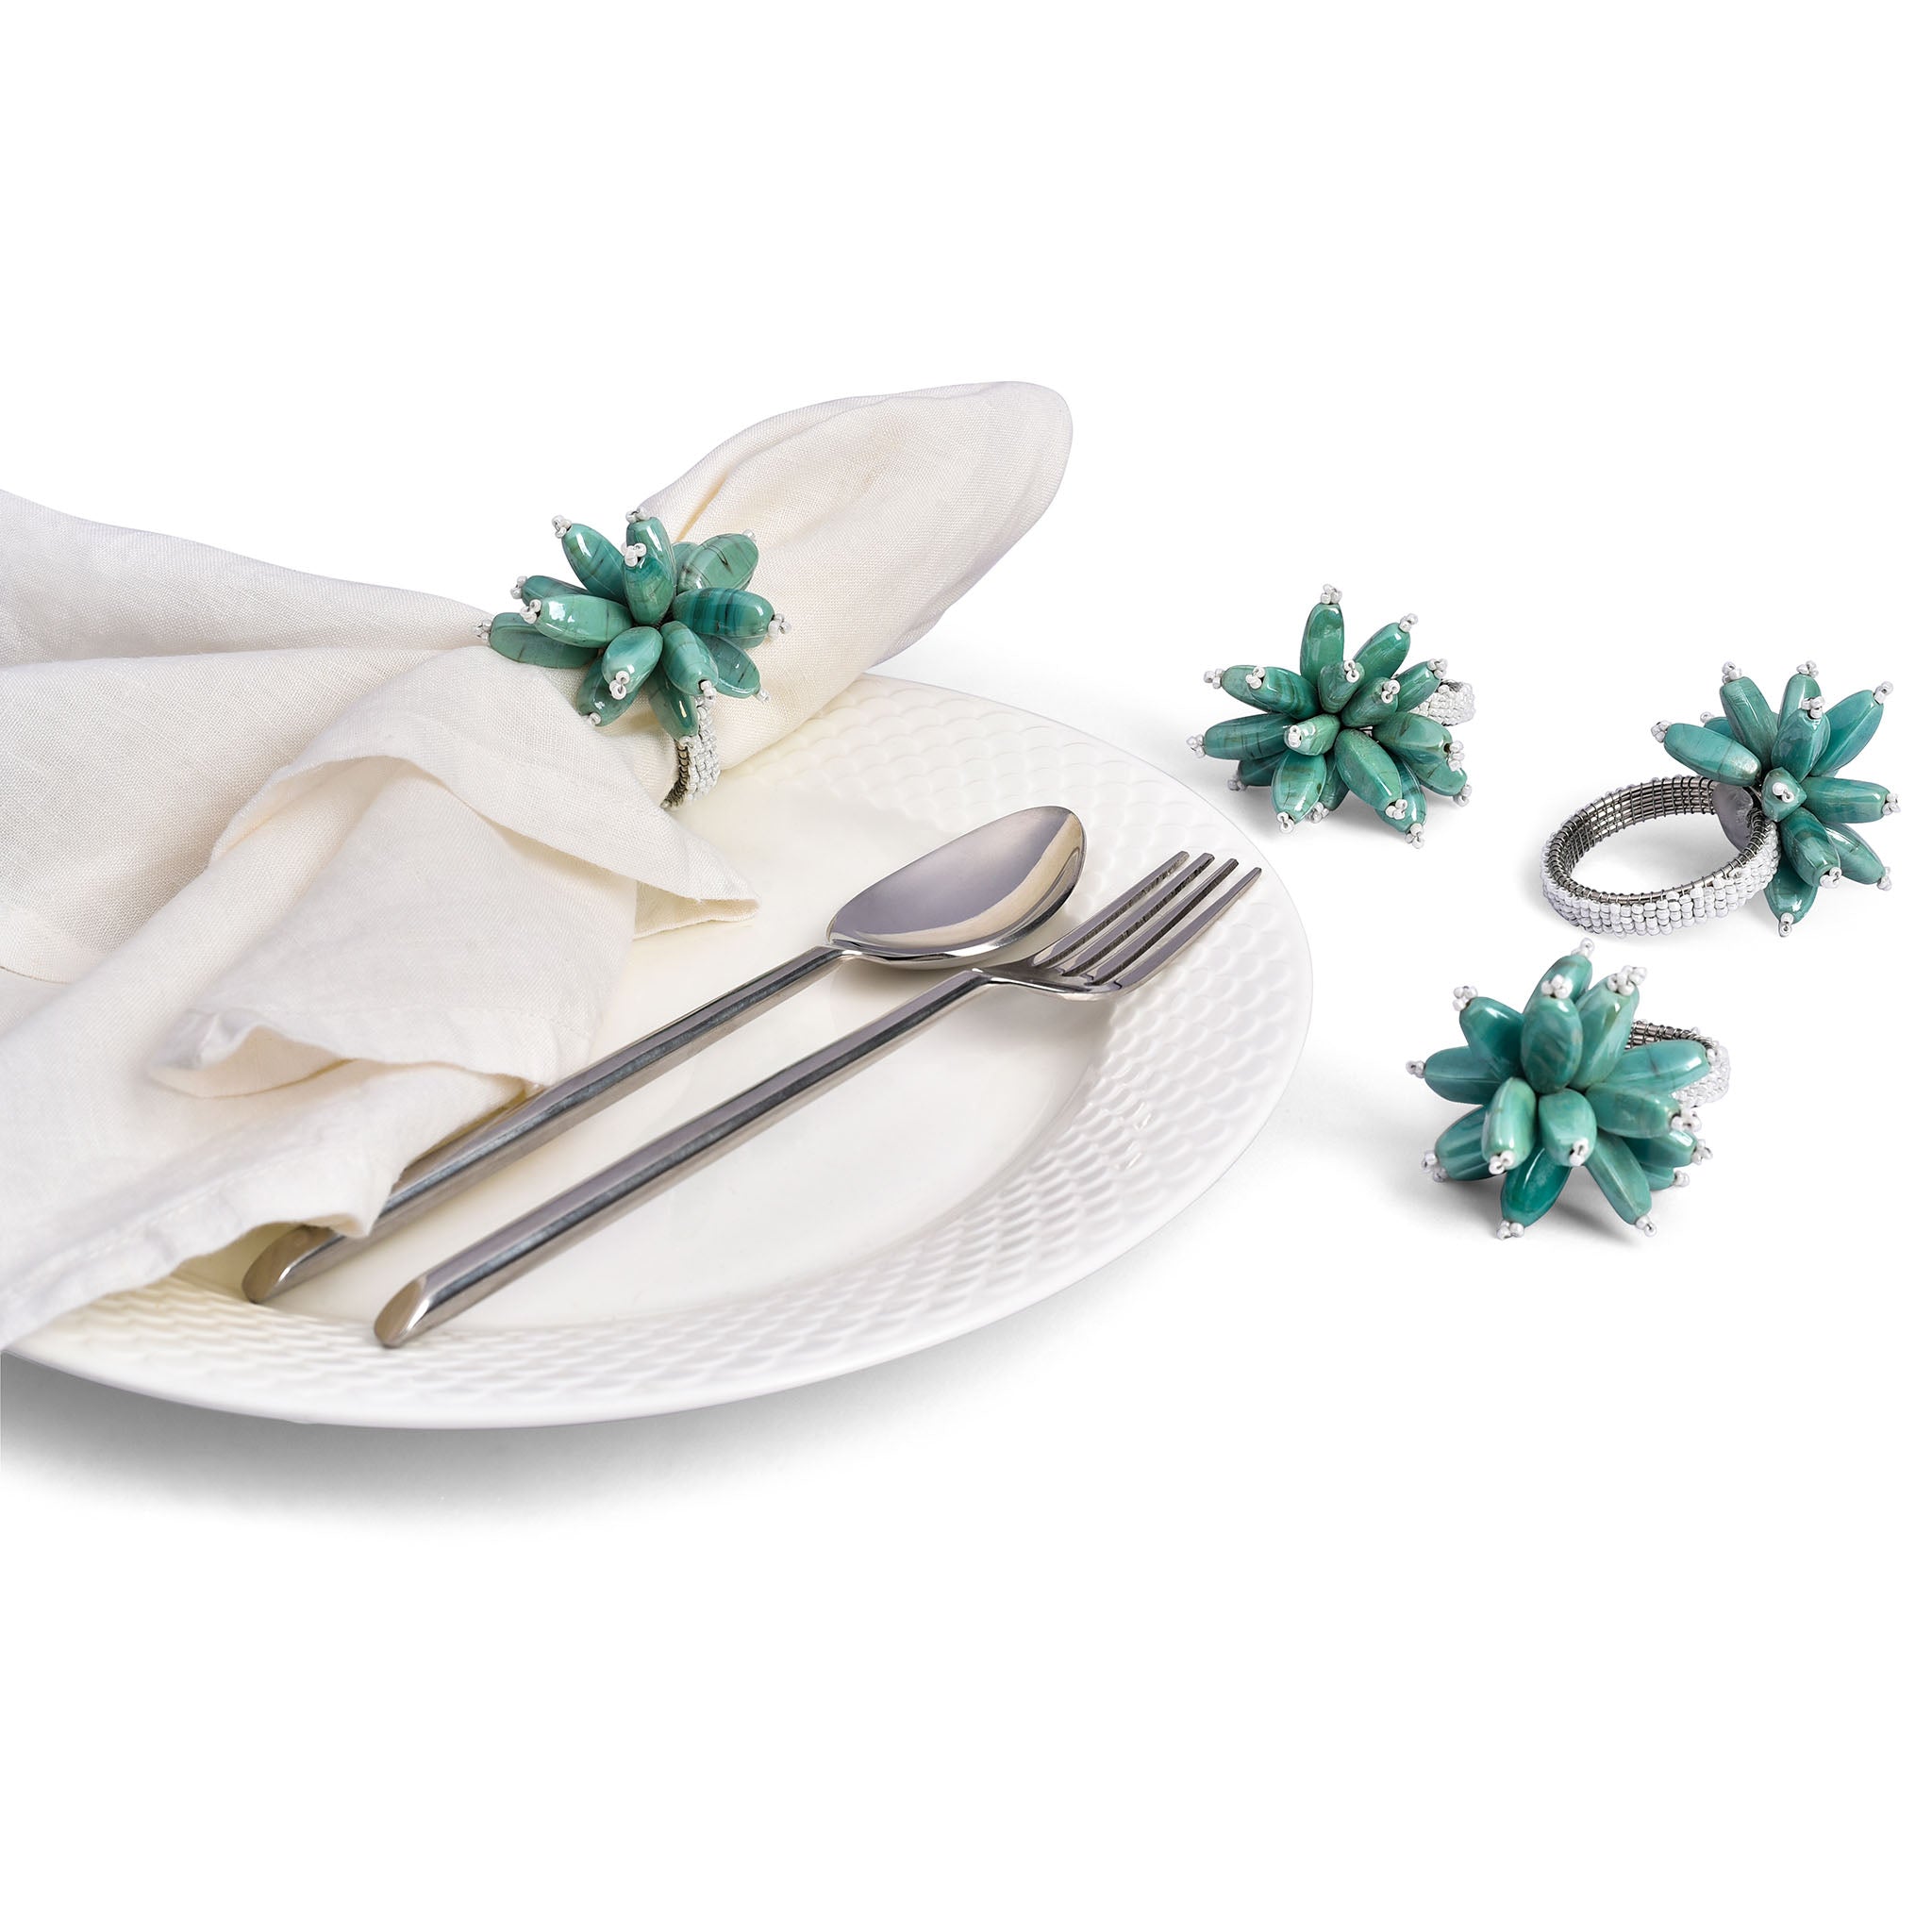 Glass Bead Table Setting for 4 - Placemats & Napkin Rings in Olive Green